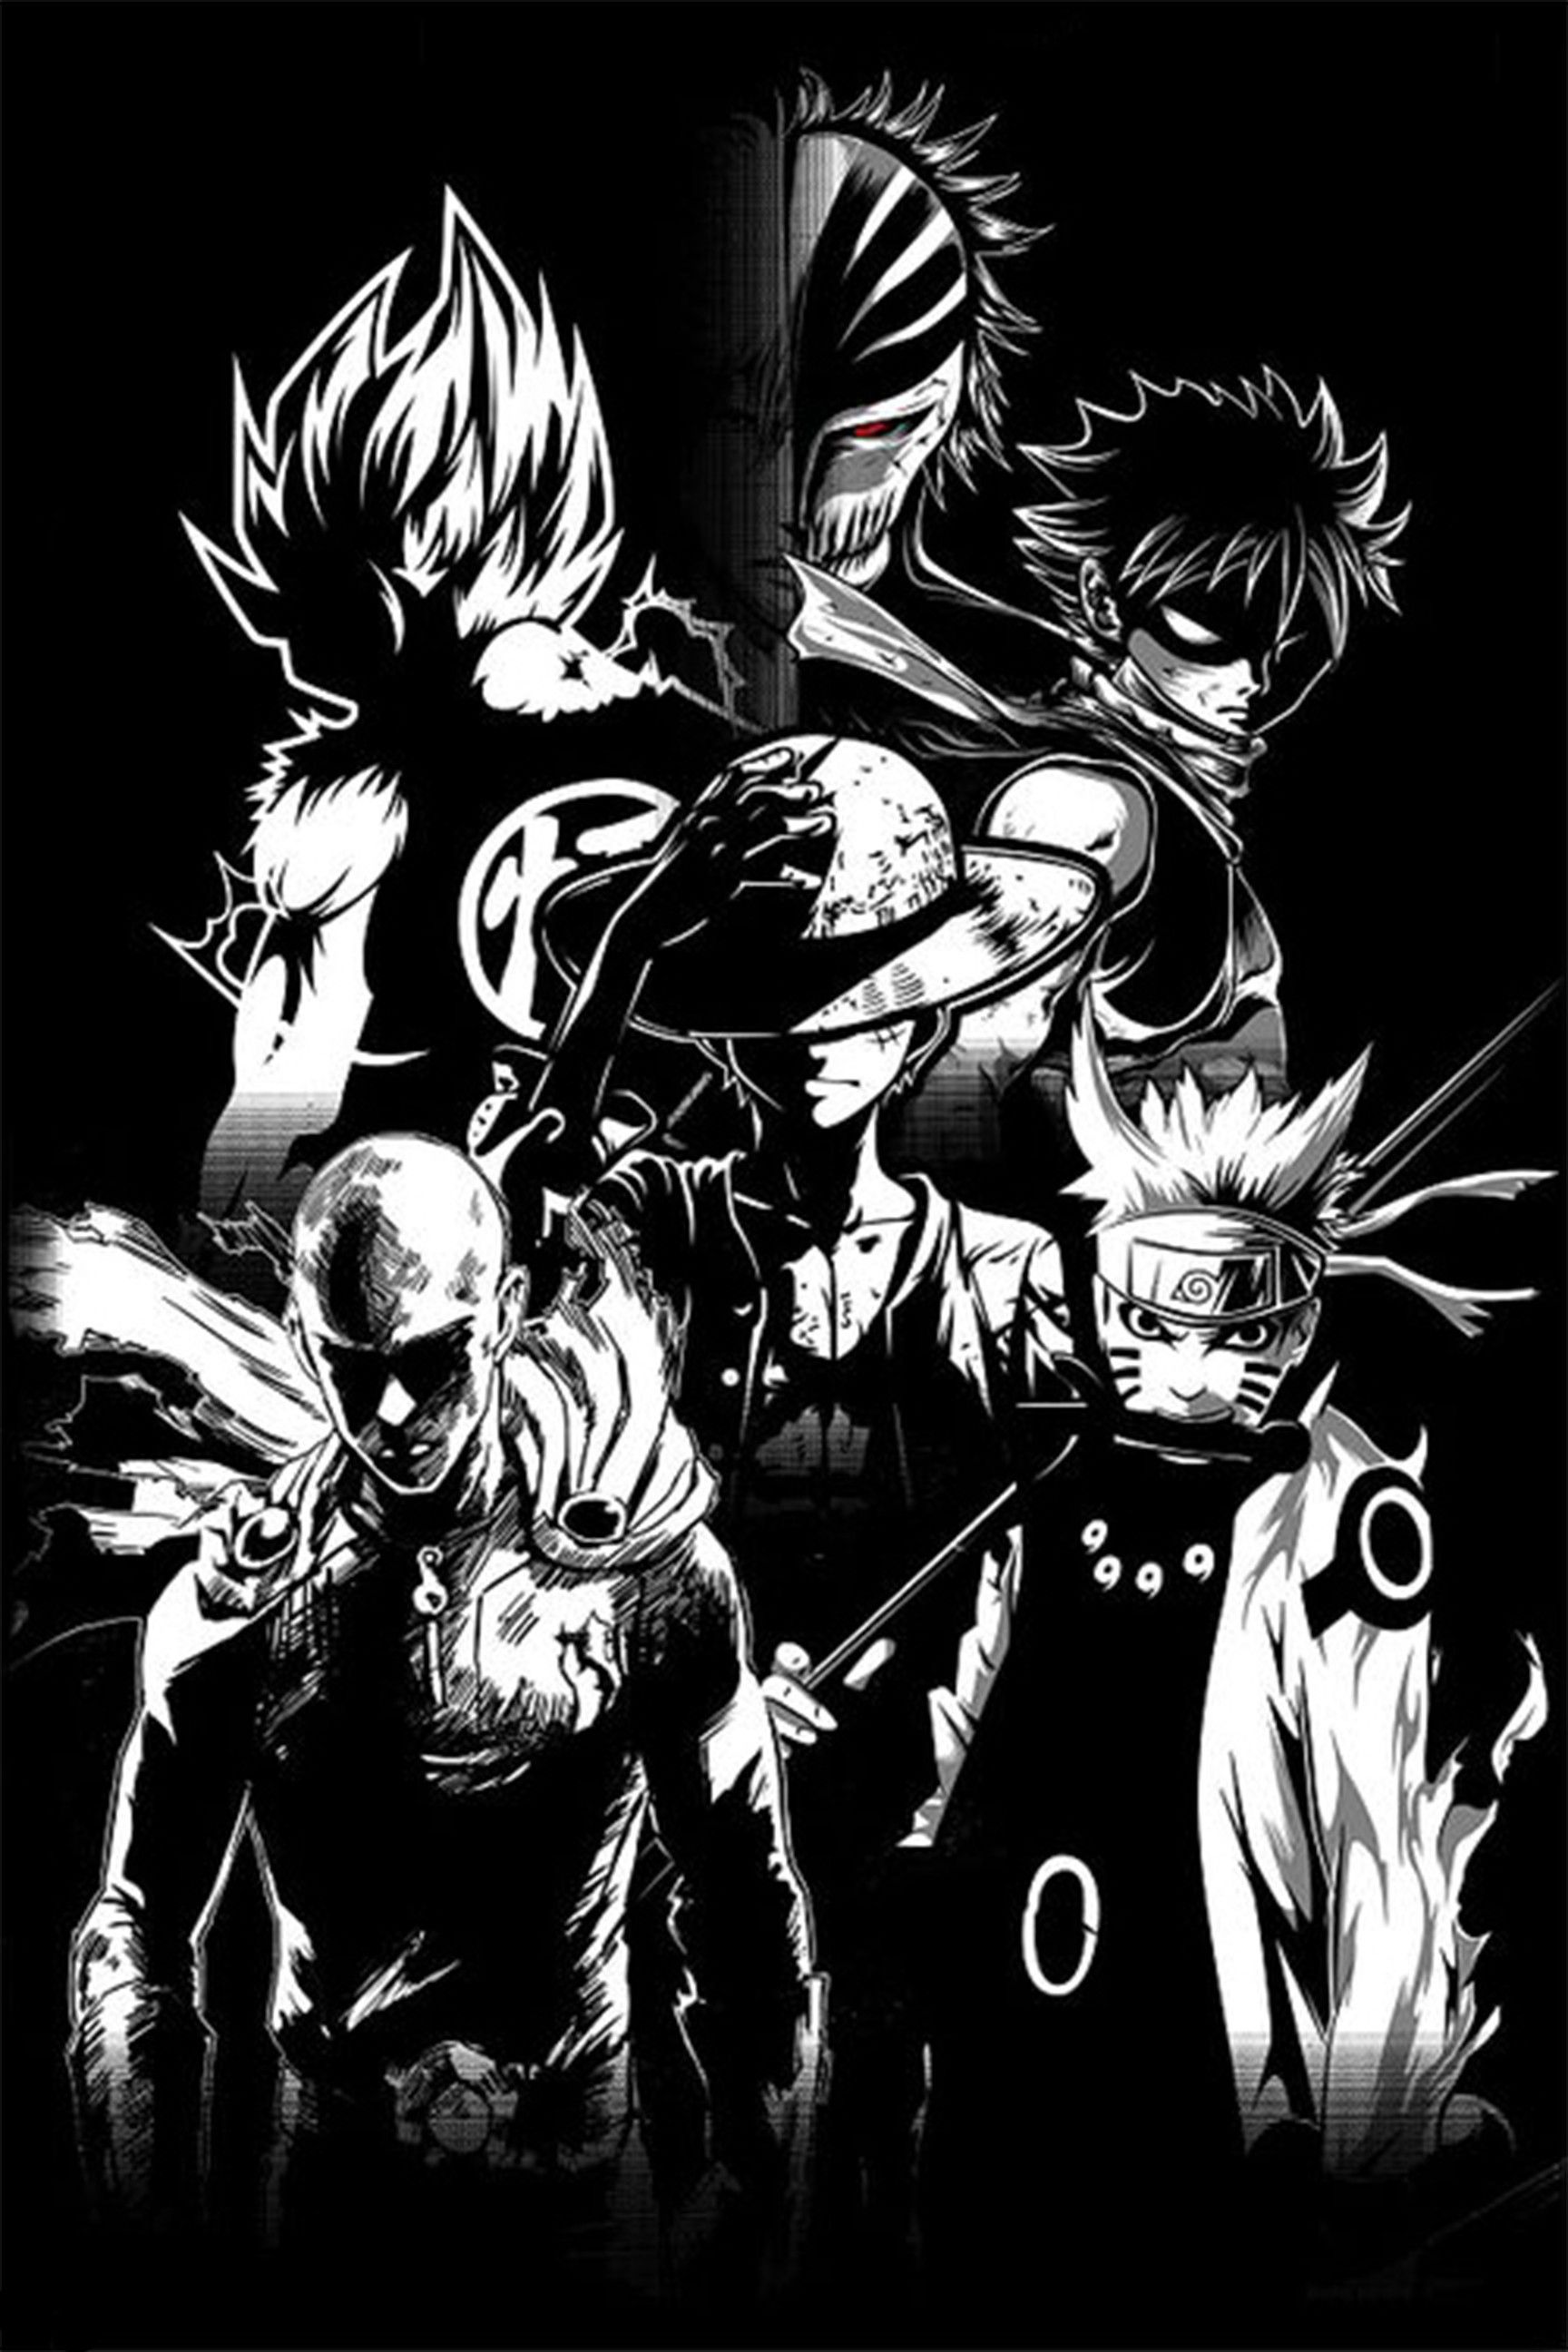 Anime iPhone Wallpaper That's Geek-Out Worthy - FanBolt